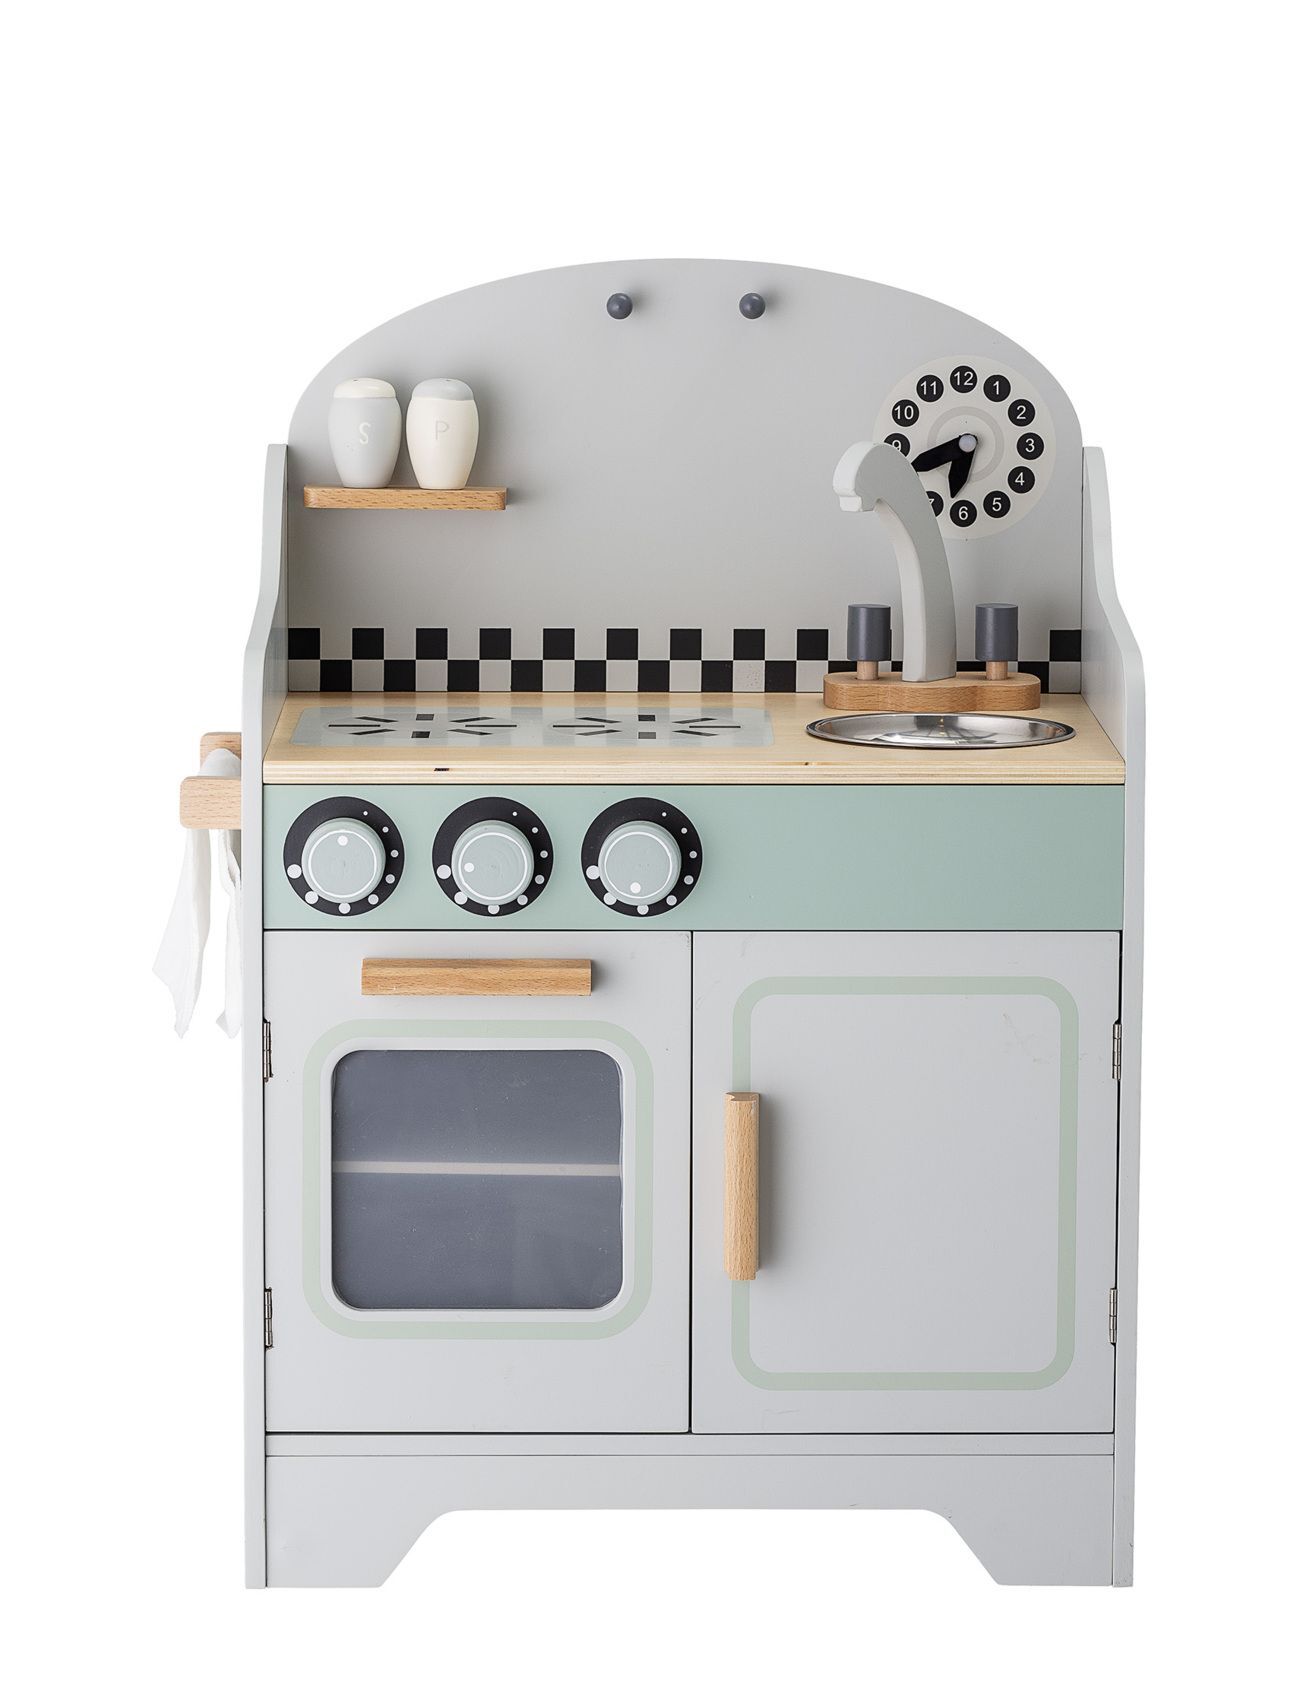 Bloomingville Halime Mini Stove, Grey, Mdf Toys Toy Kitchen & Accessories Toy Kitchens Multi/mønstret Bloomingville